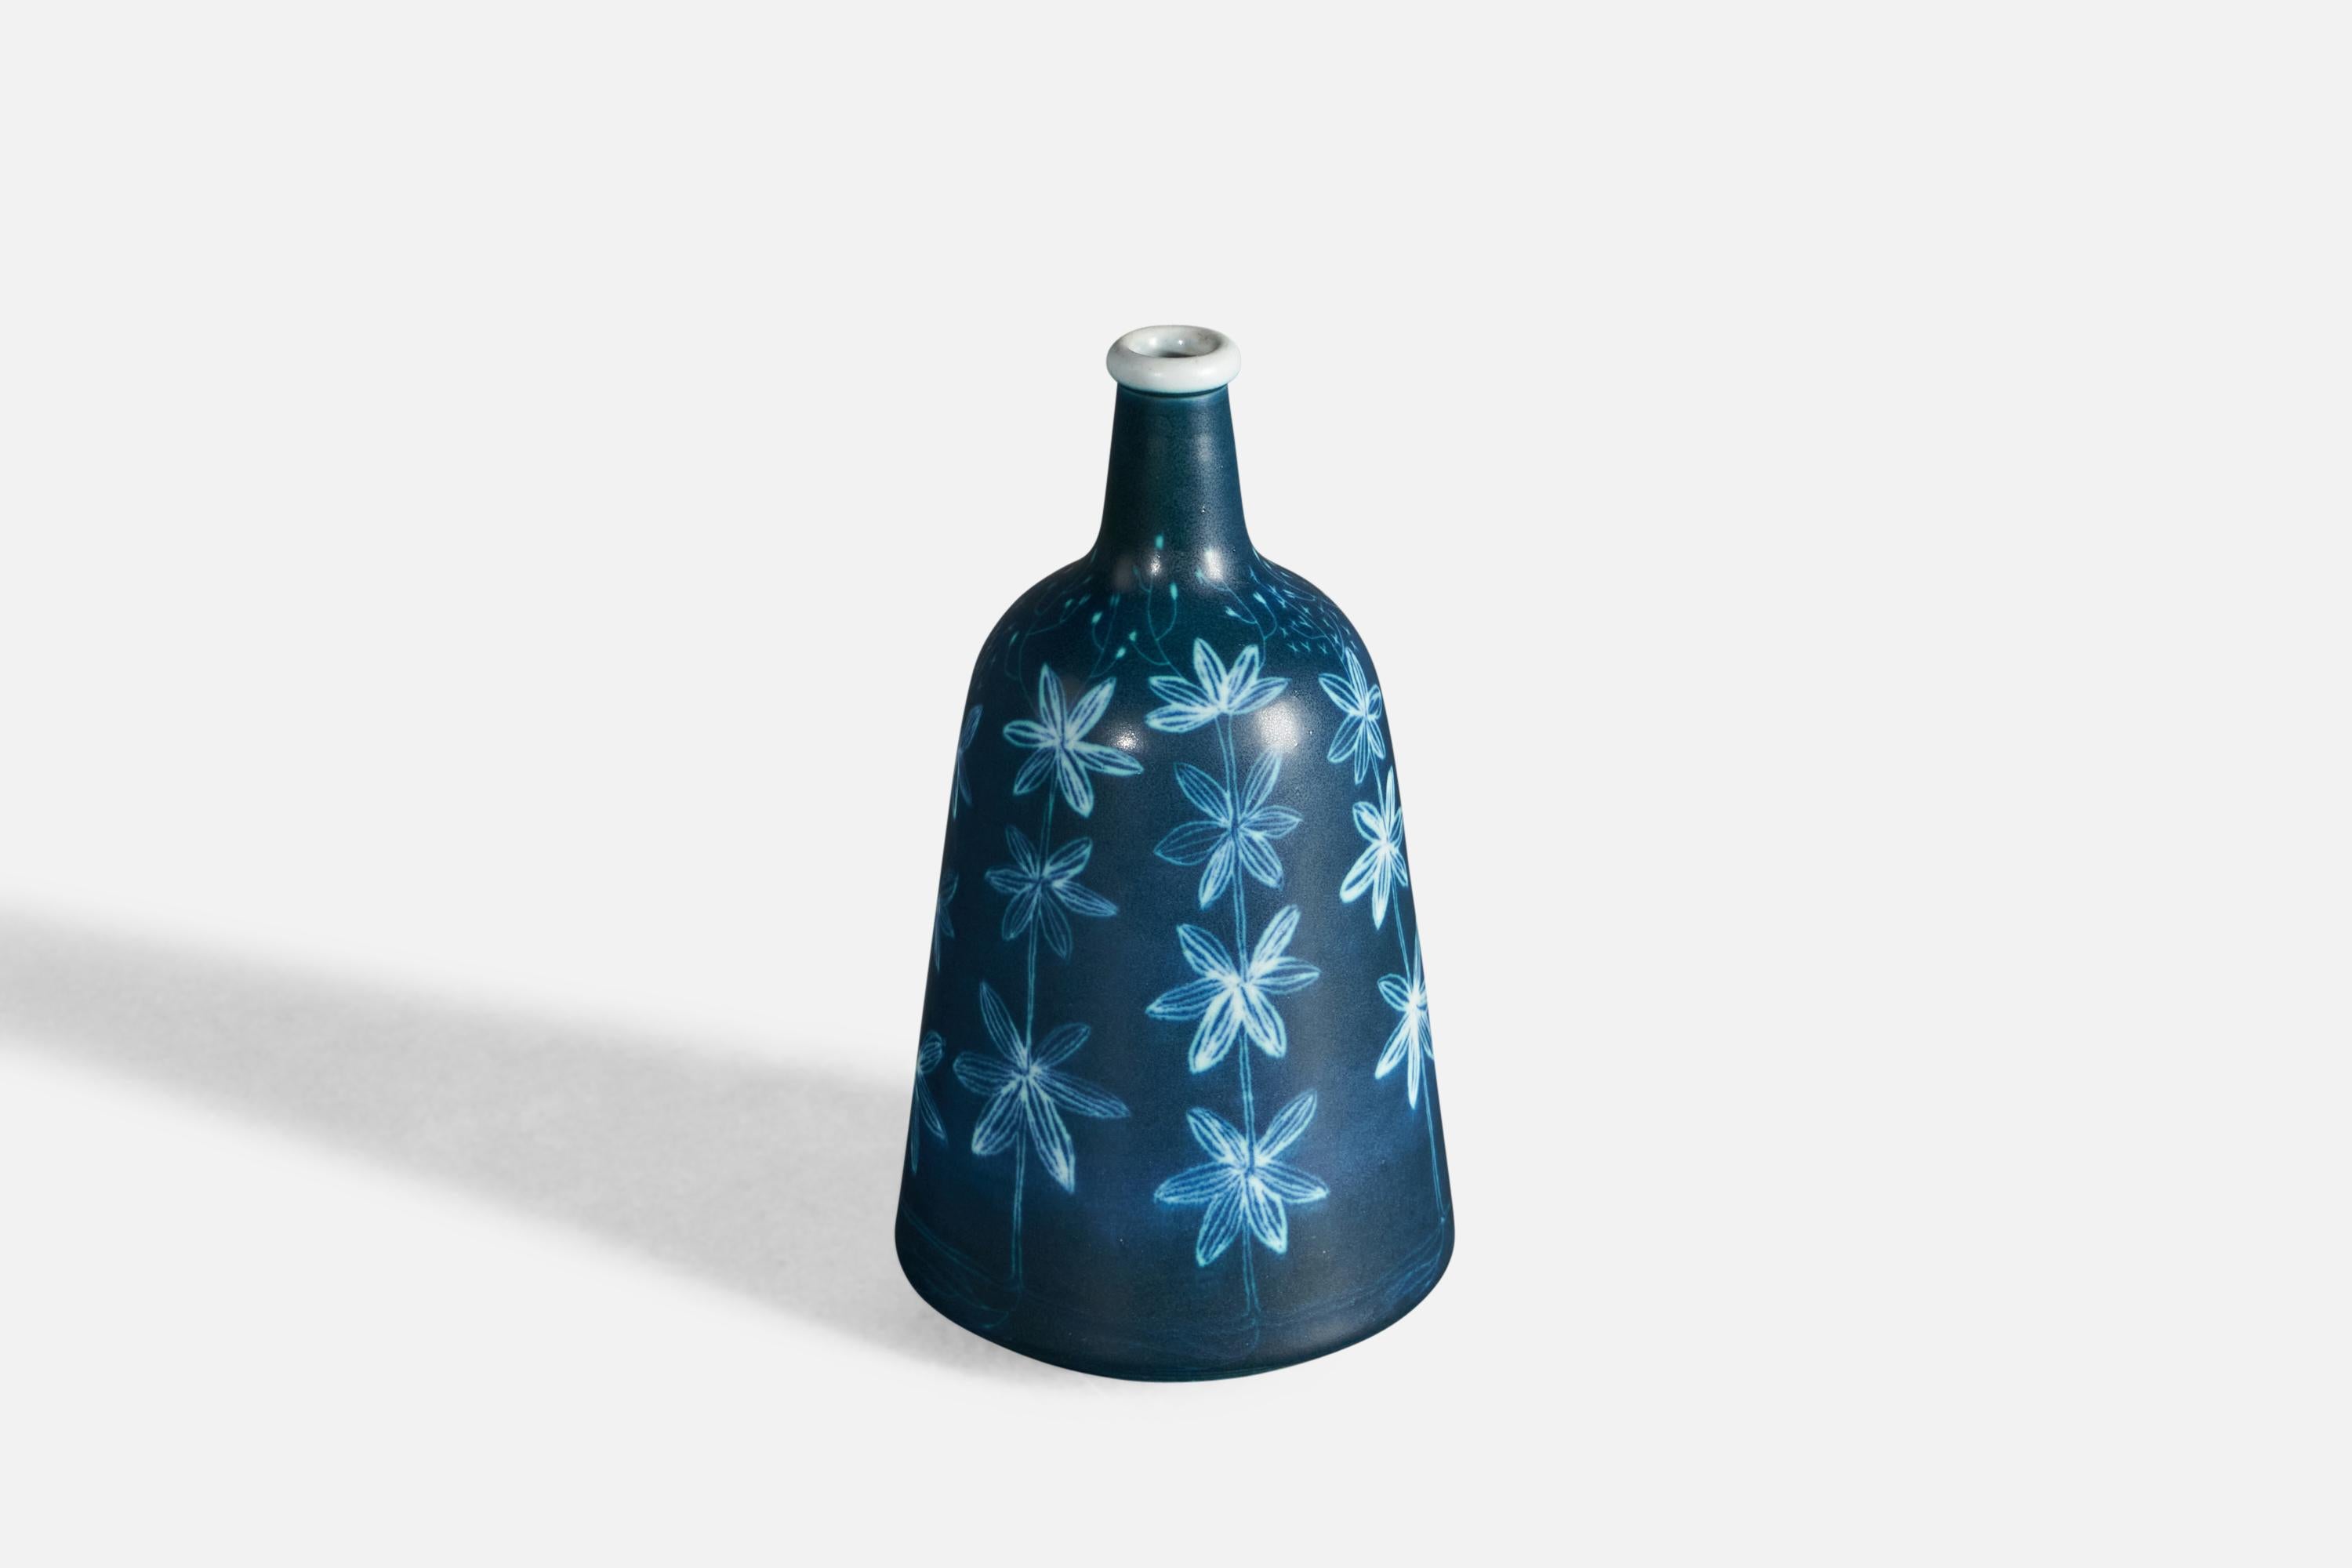 A blue-glazed stoneware vase, designed by Hertha Bengtson, and produced by Rörstrand, Sweden, c. 1950s.